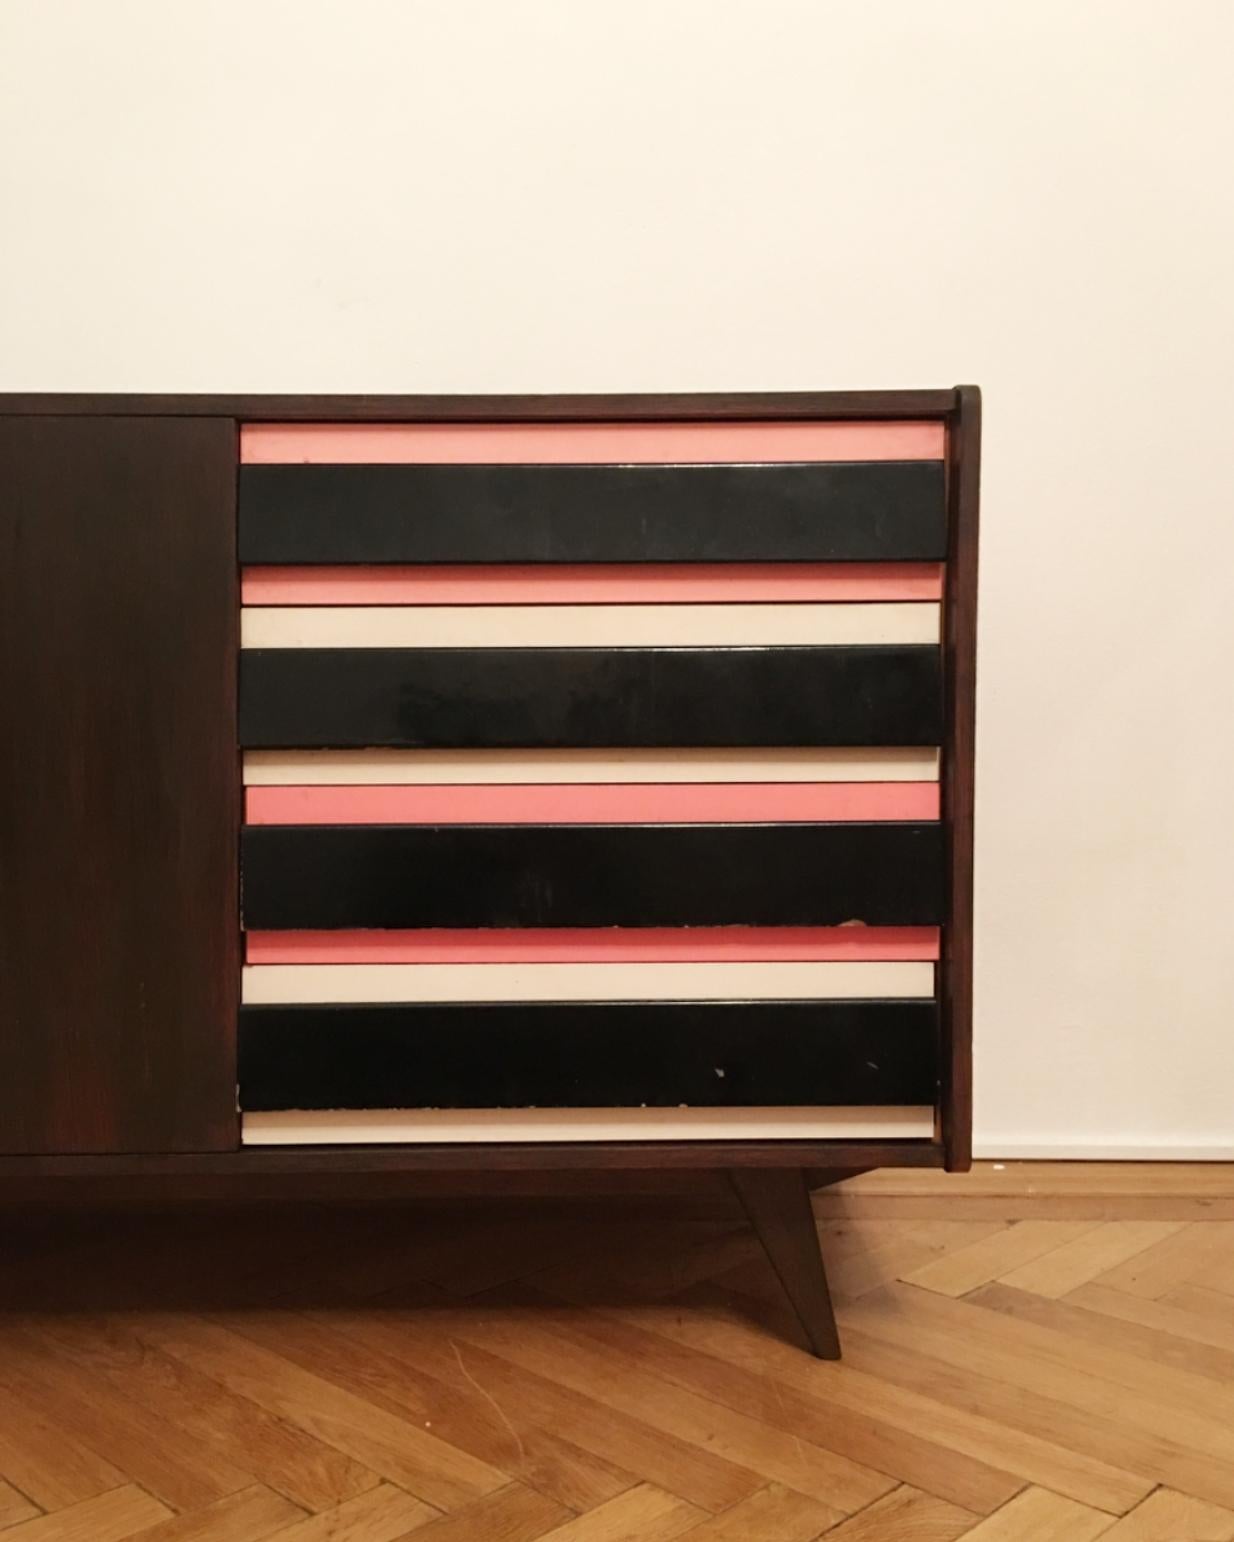 Original vintage sideboard with two doors and the side drawers in black and pink and grey-blue combination. Type U-460, manufactured in the 1960s by Interier Praha, designed by Jiri Jiroutek. Wooden construction and wooden drawers. This piece is